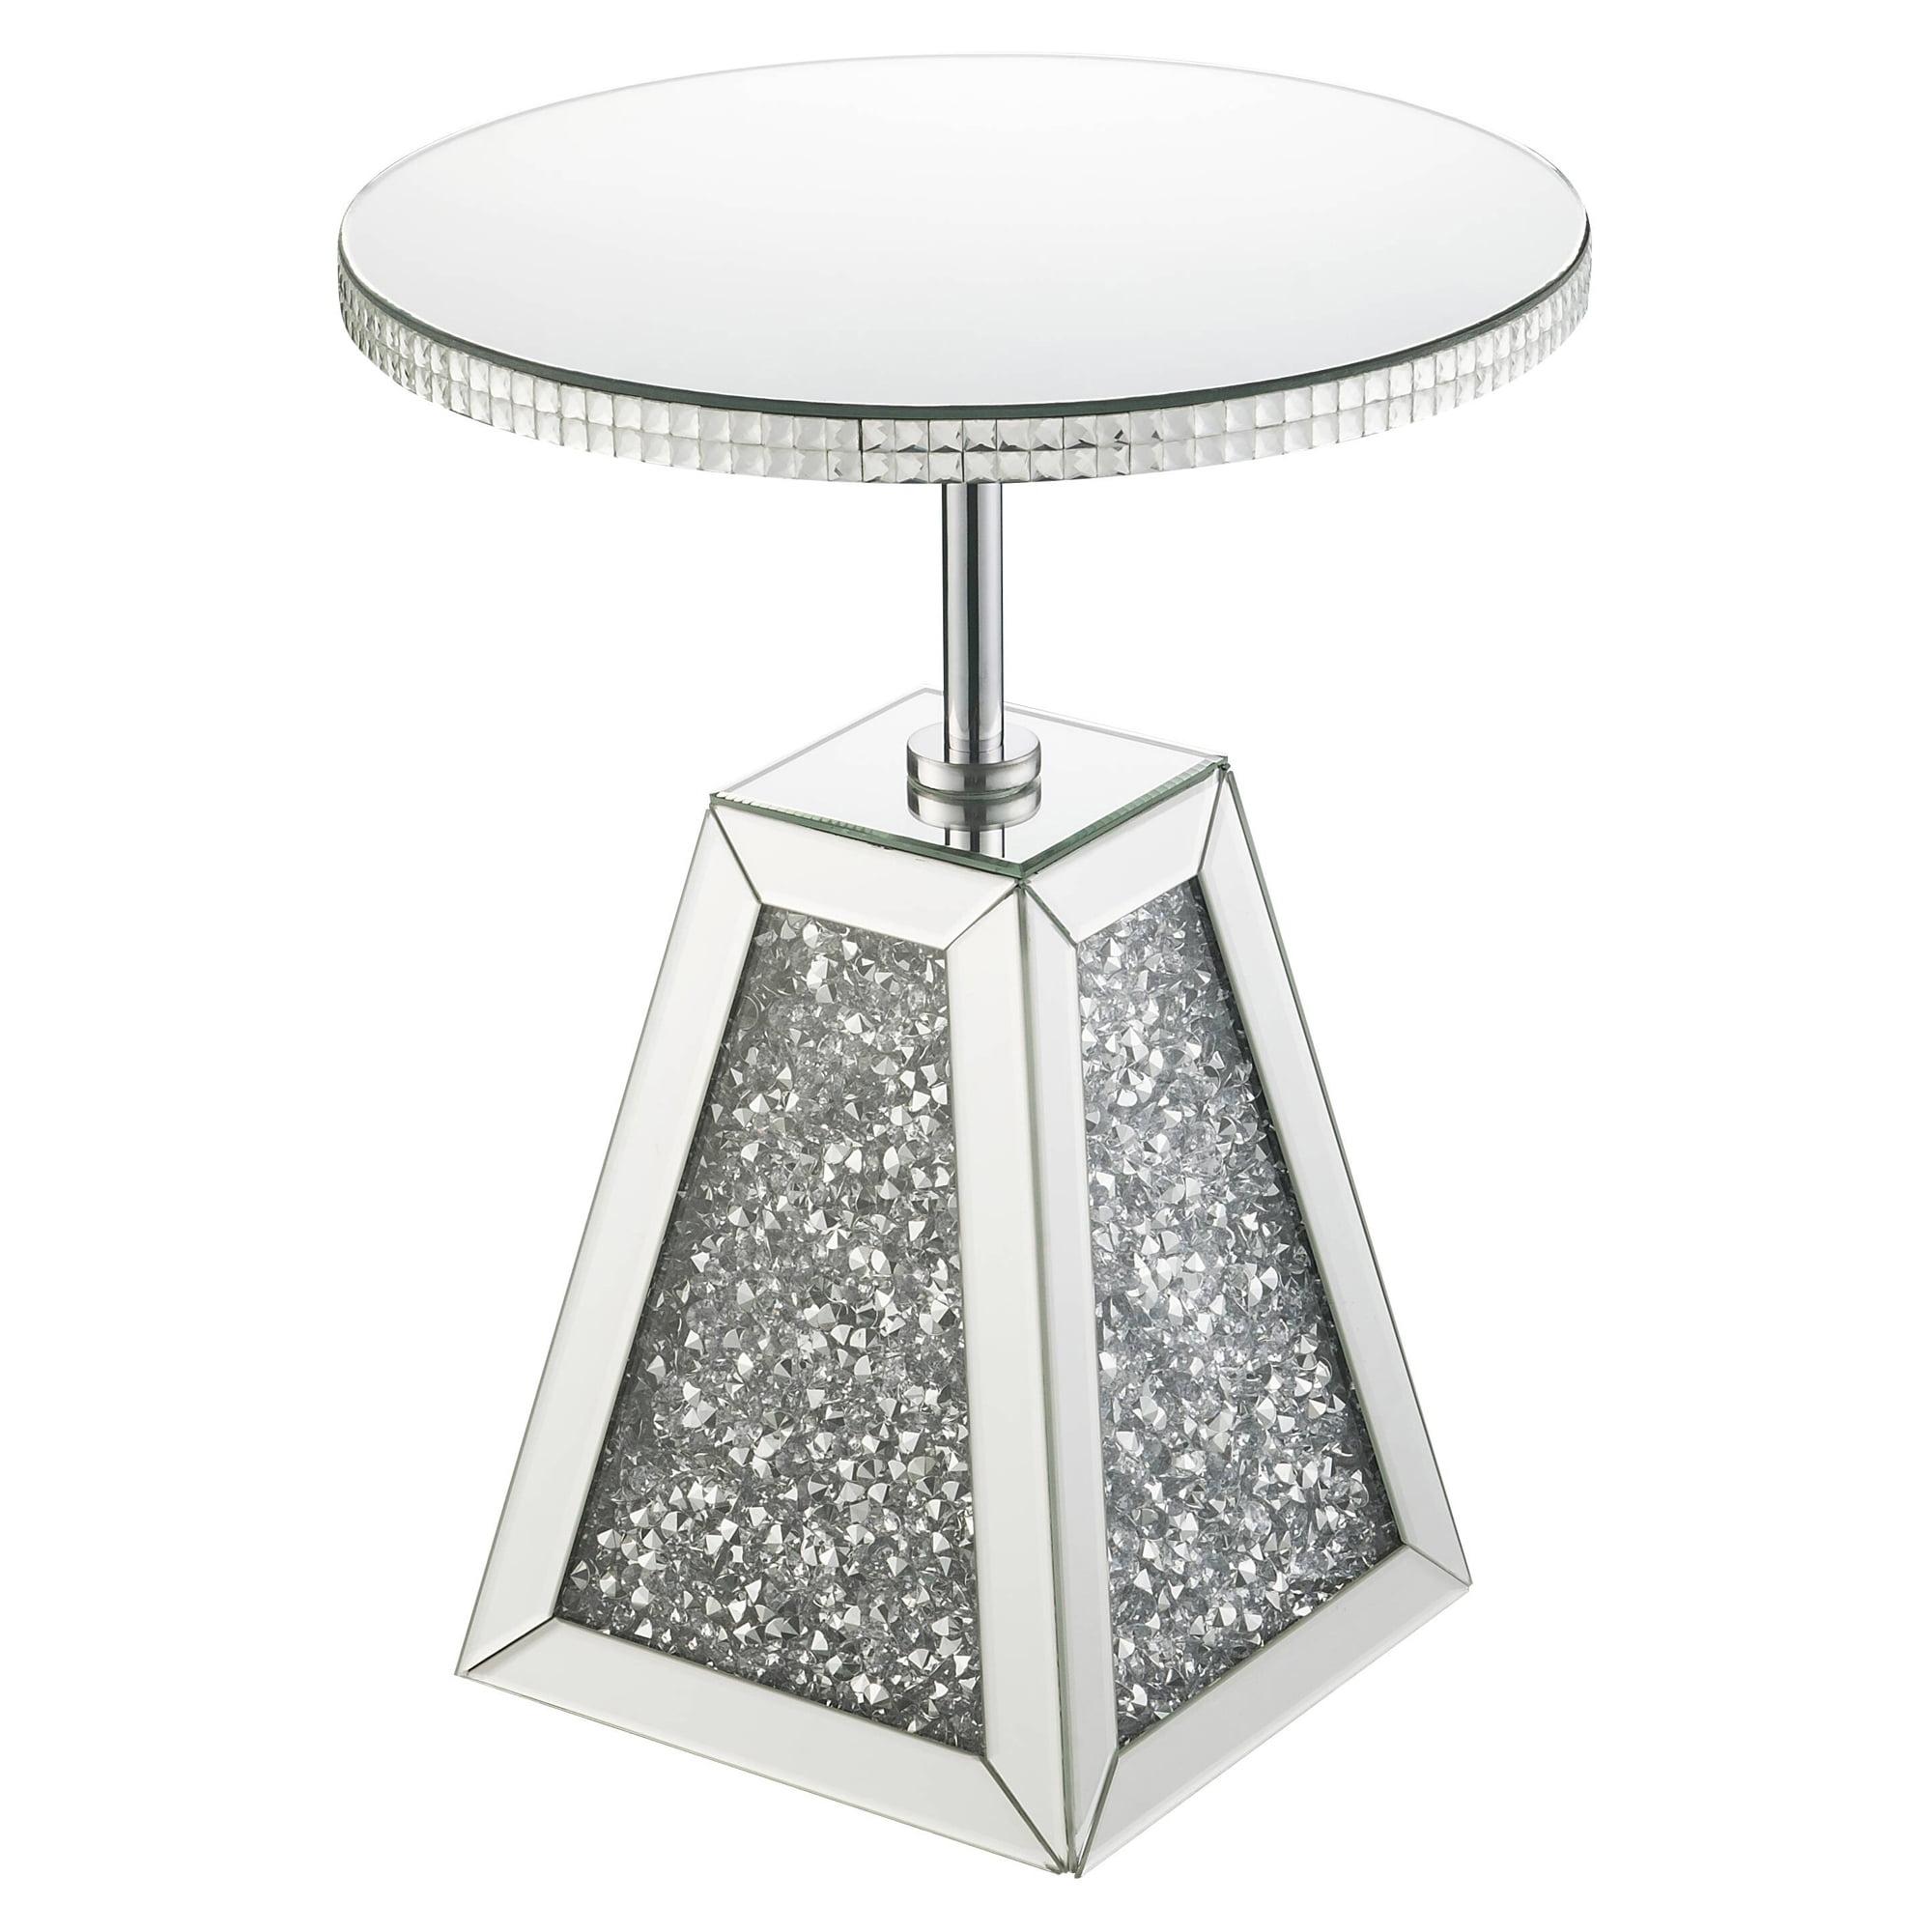 Elegant Round Wood & Glass Mirrored Accent Table